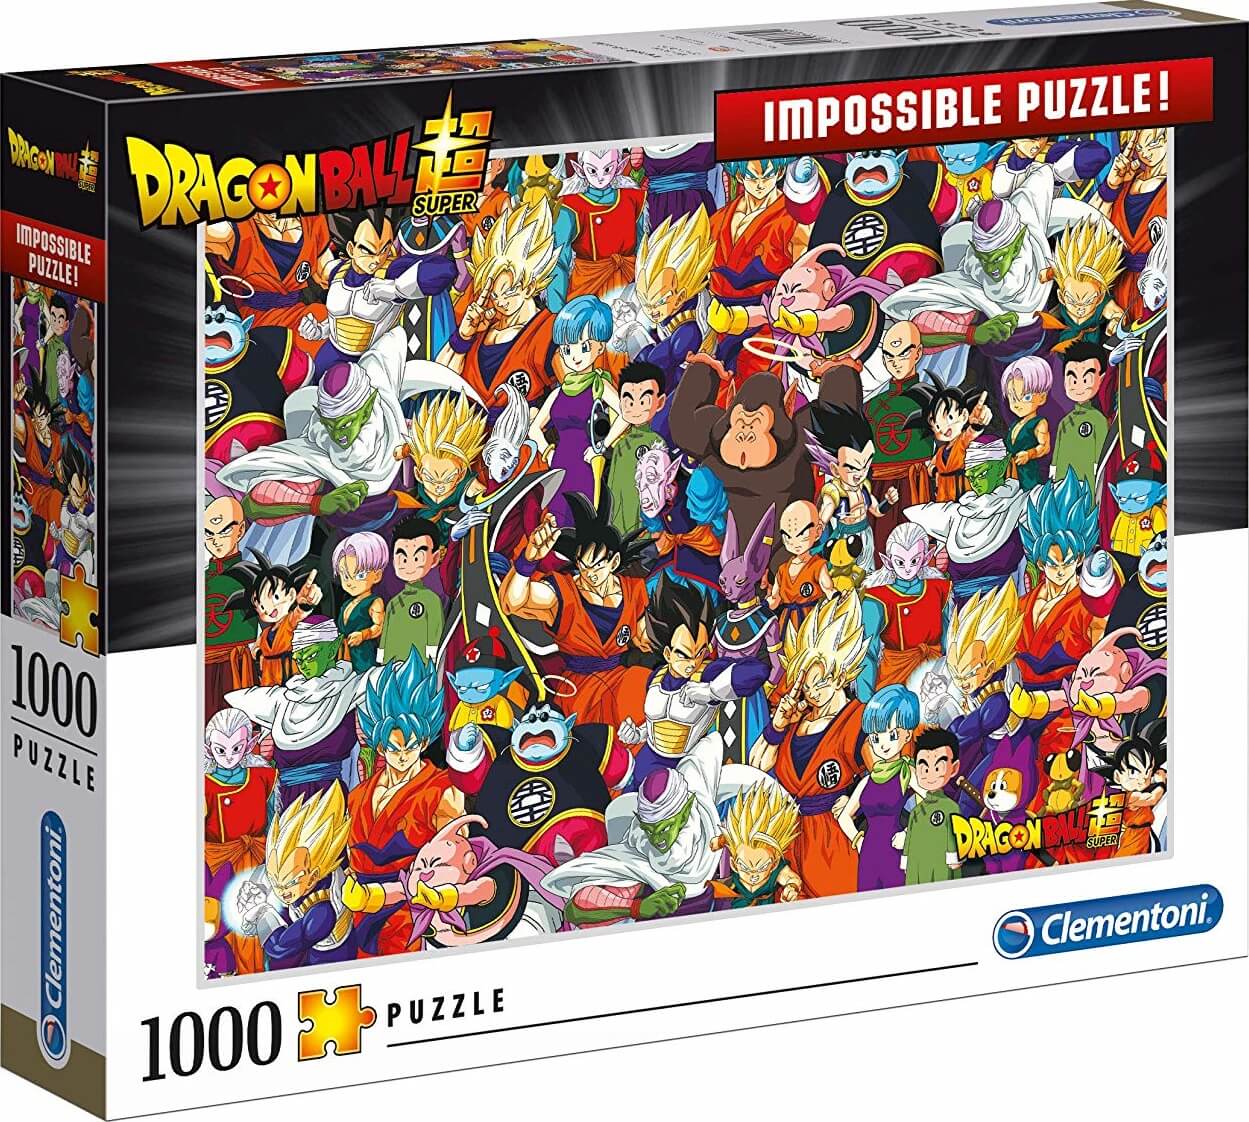 1000 Imposible Puzzle Dragon Ball